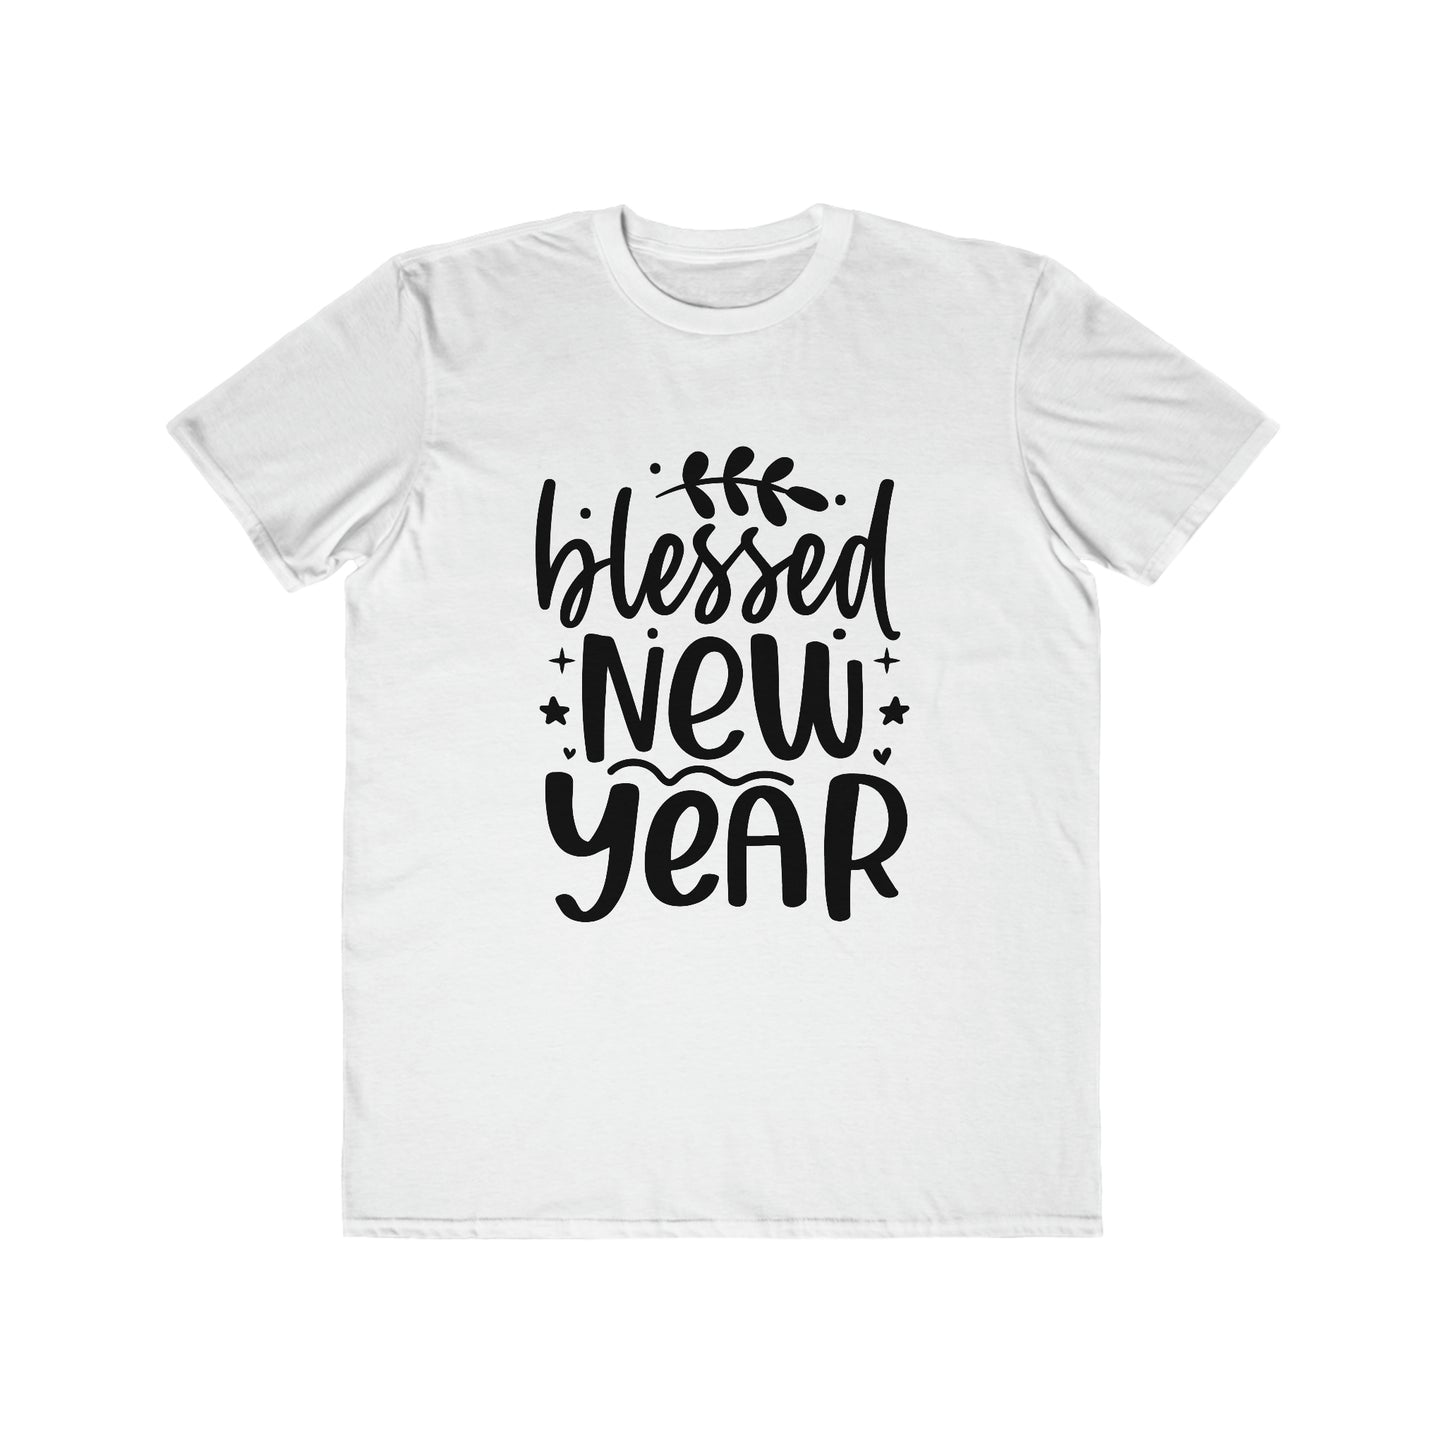 Blessed New Year Men's Lightweight Fashion Tee